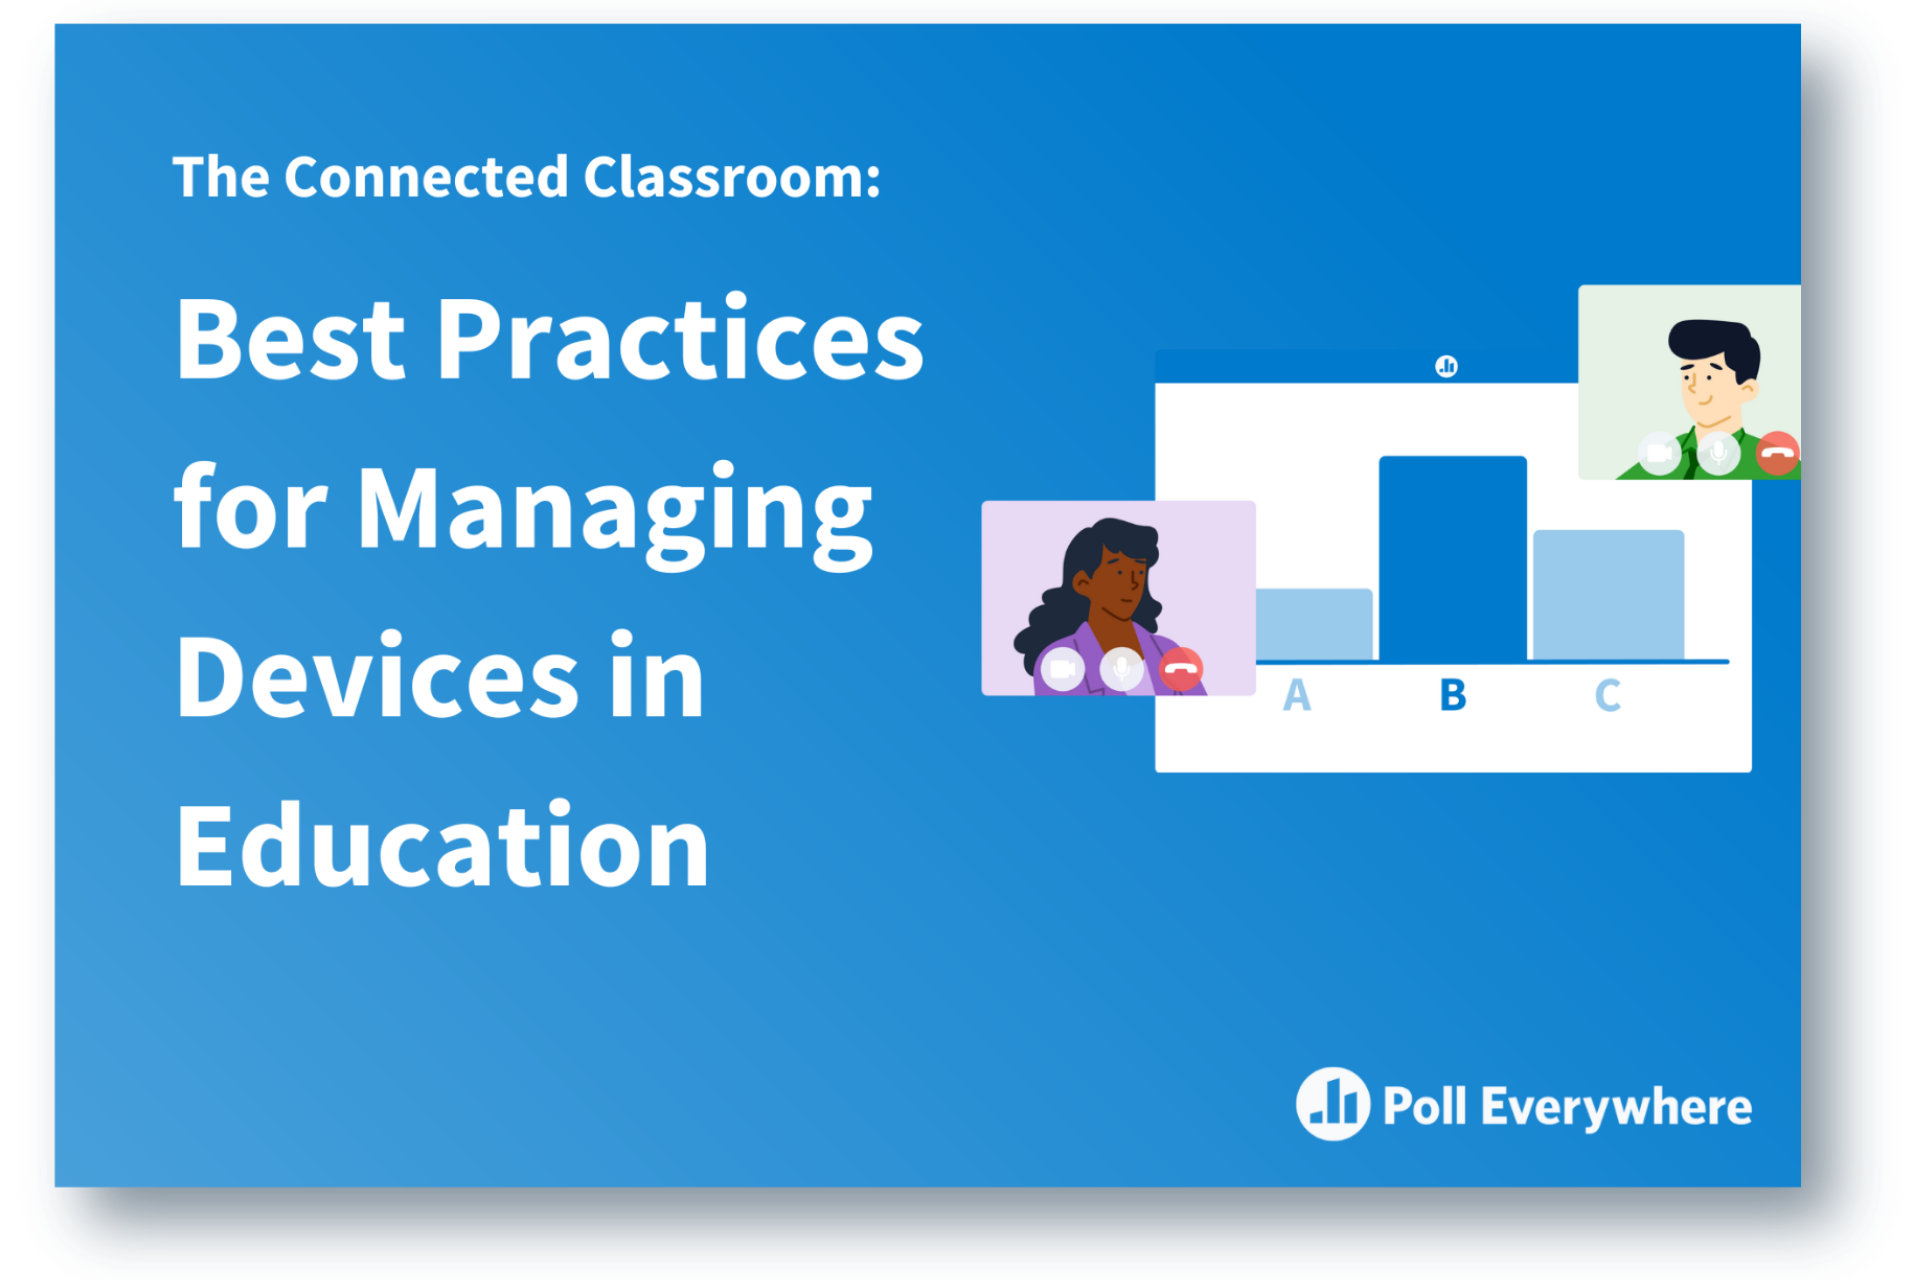 Cover image of Poll Everywhere's eBook - The Connected Classroom: Best Practices for Managing Devices in Education